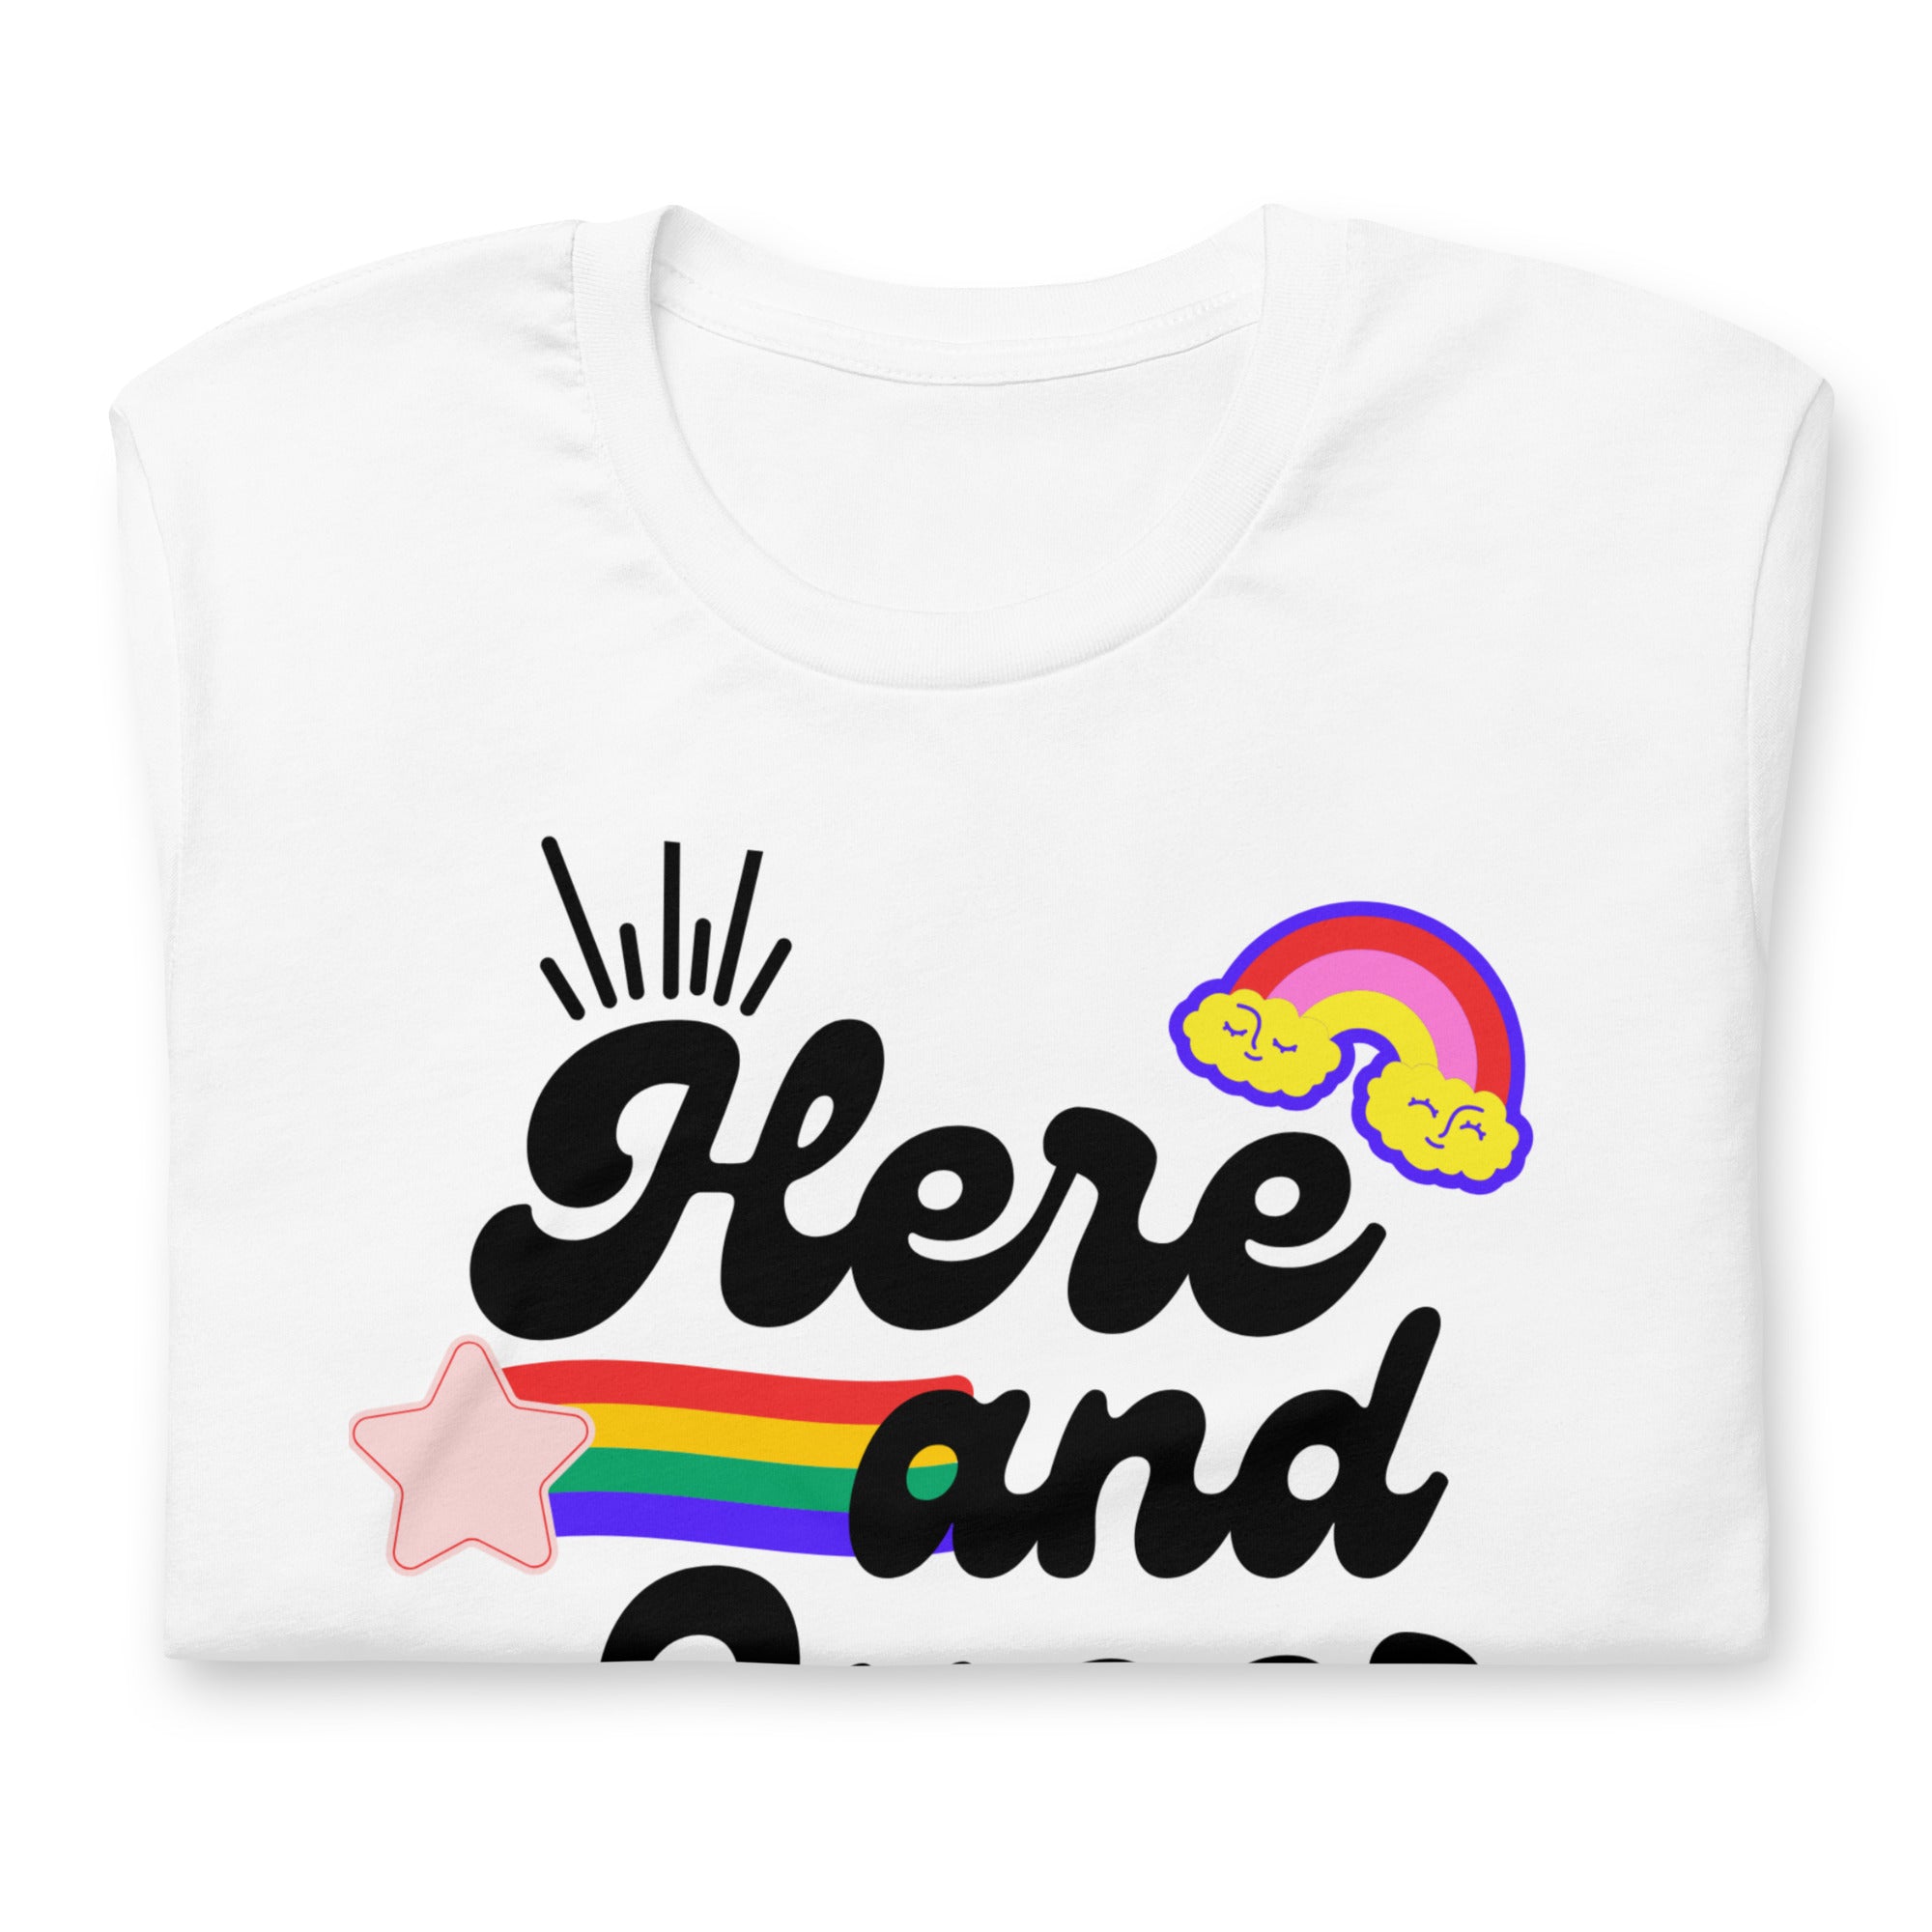 Here and Queer - Unisex T-Shirt